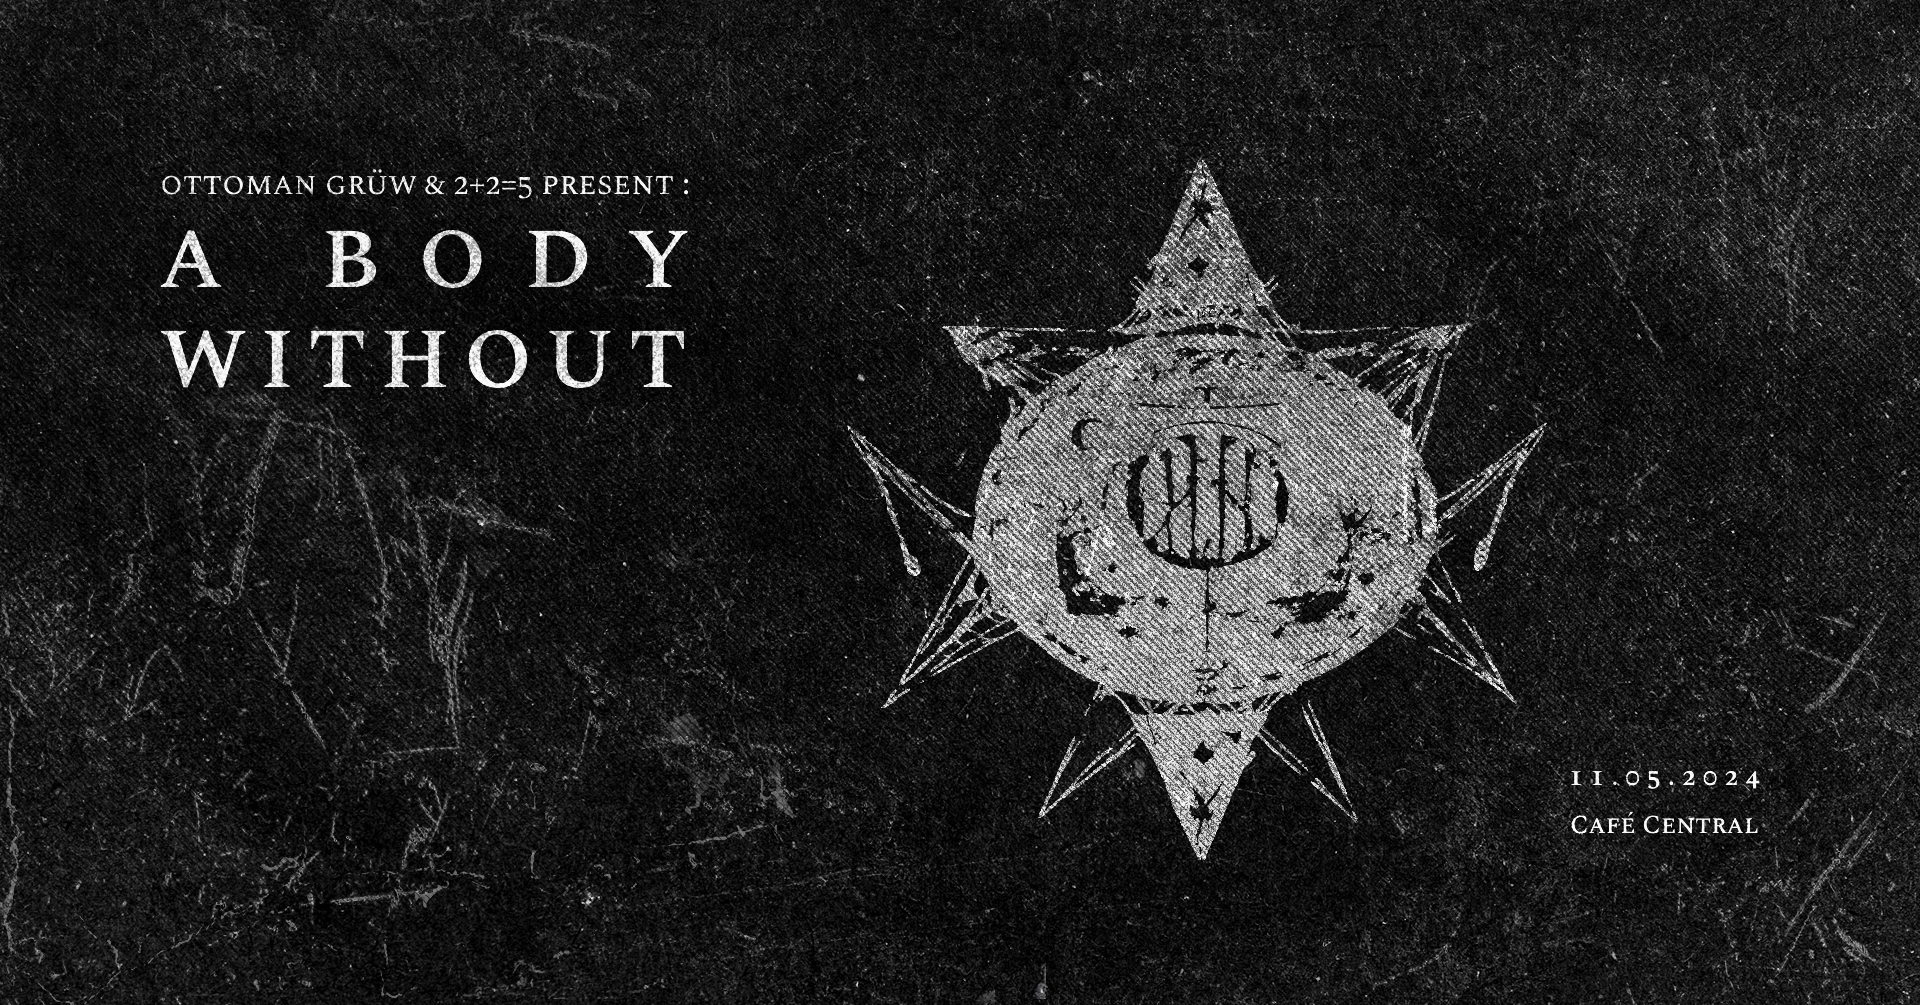 A BODY WITHOUT - PROJECT LAUNCH by Ottoman Grüw & 2+2=5 [Techno - EBM - Industrial - Post-Punk] - Página frontal